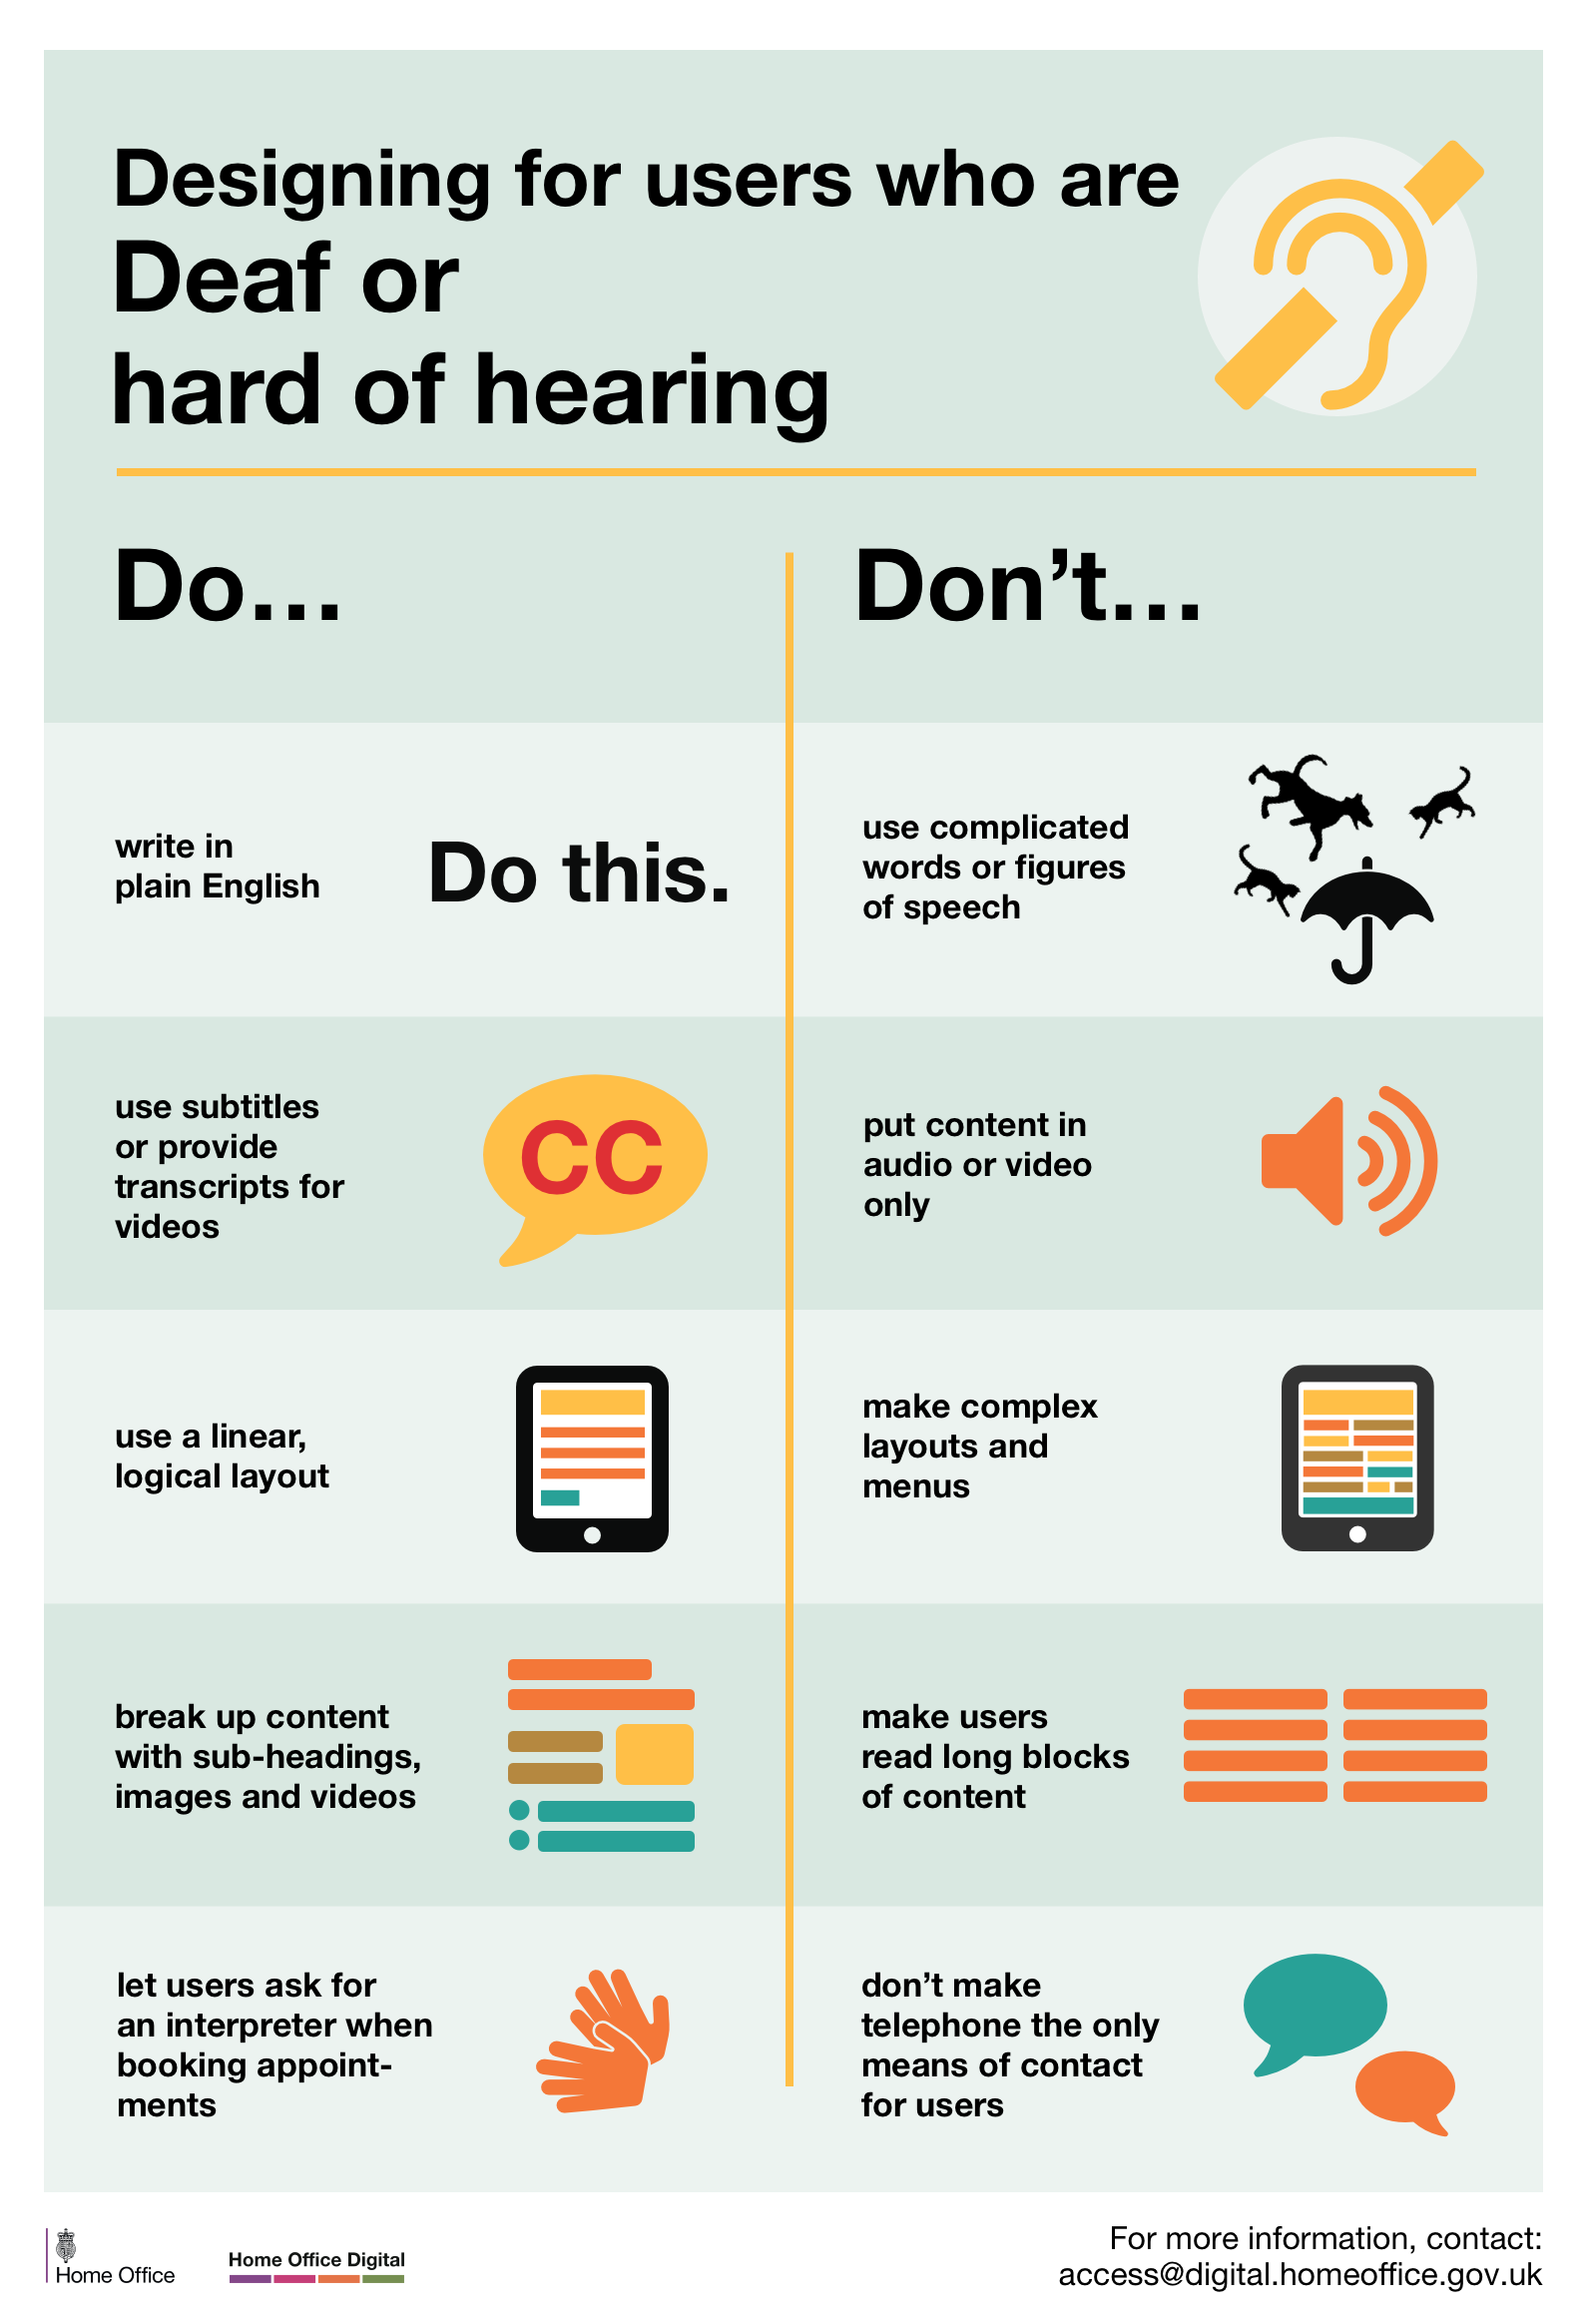 poster showing do and dont for deaf or hard of hearing